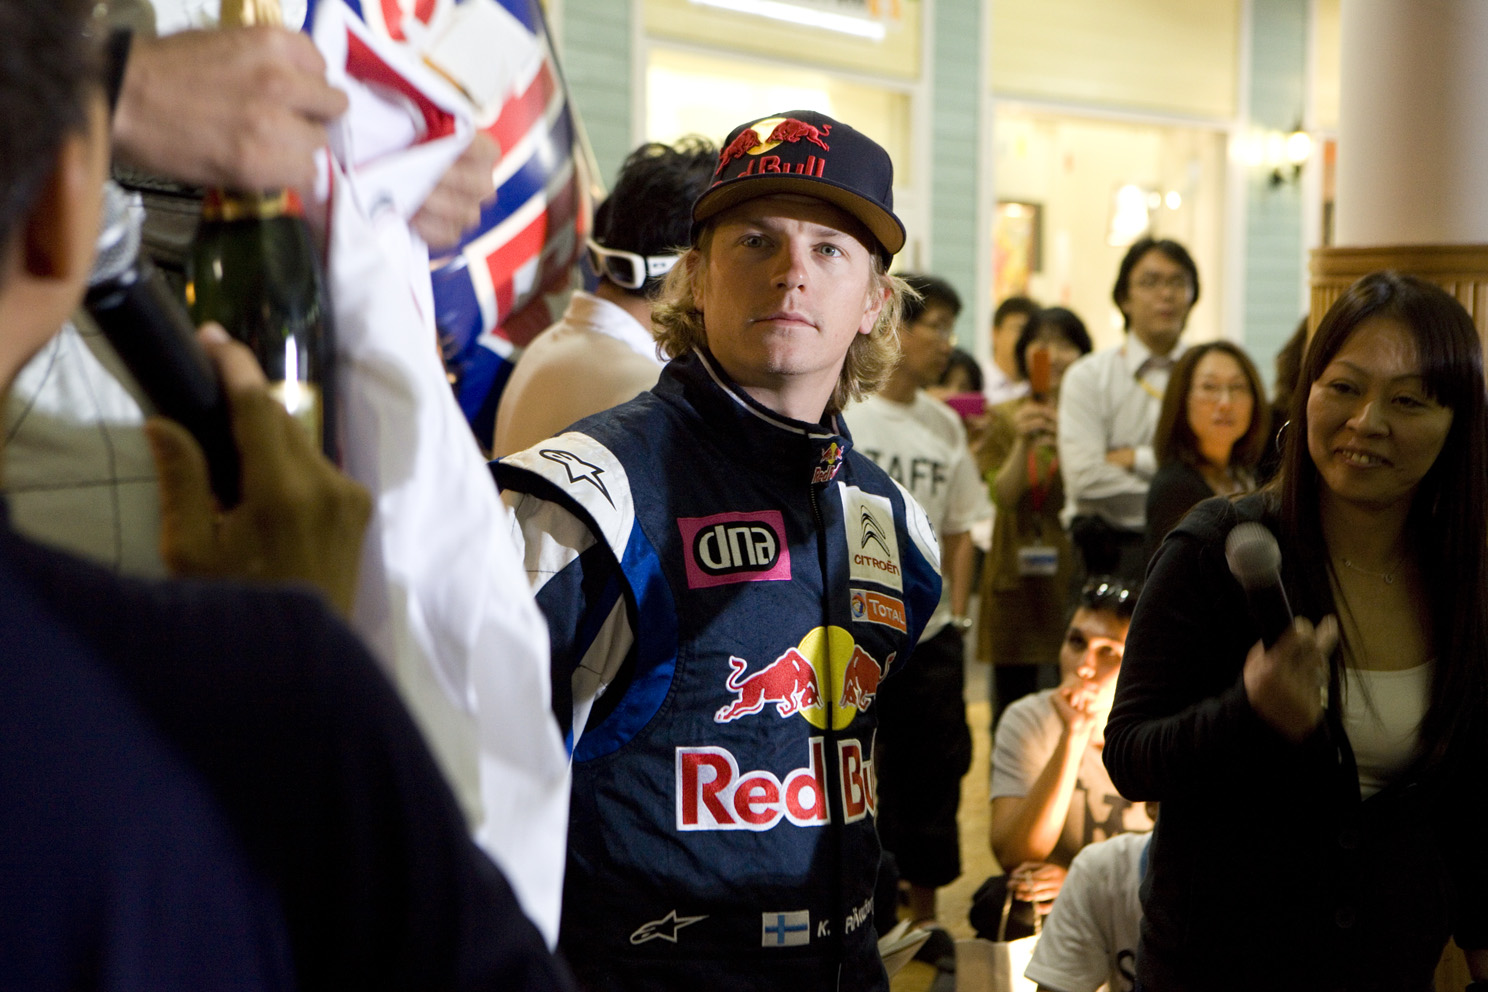 Red Bull and Citroën driver Kimi Räikkönen racing electric carts in a shopping centre in Japan.